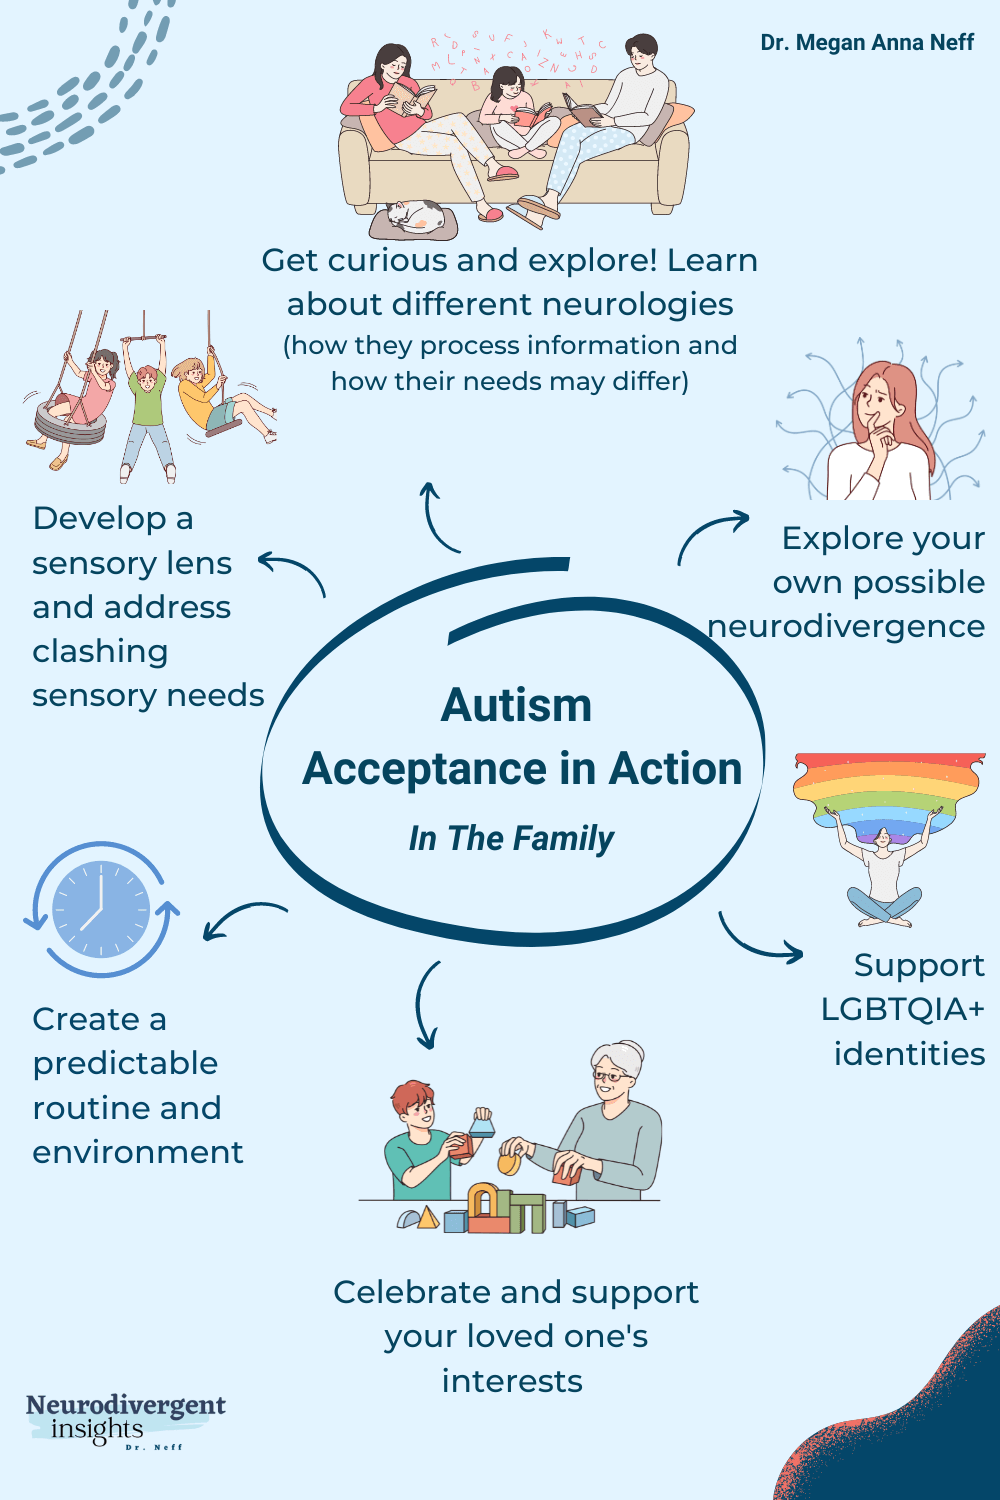 Autism acceptance in action in the family